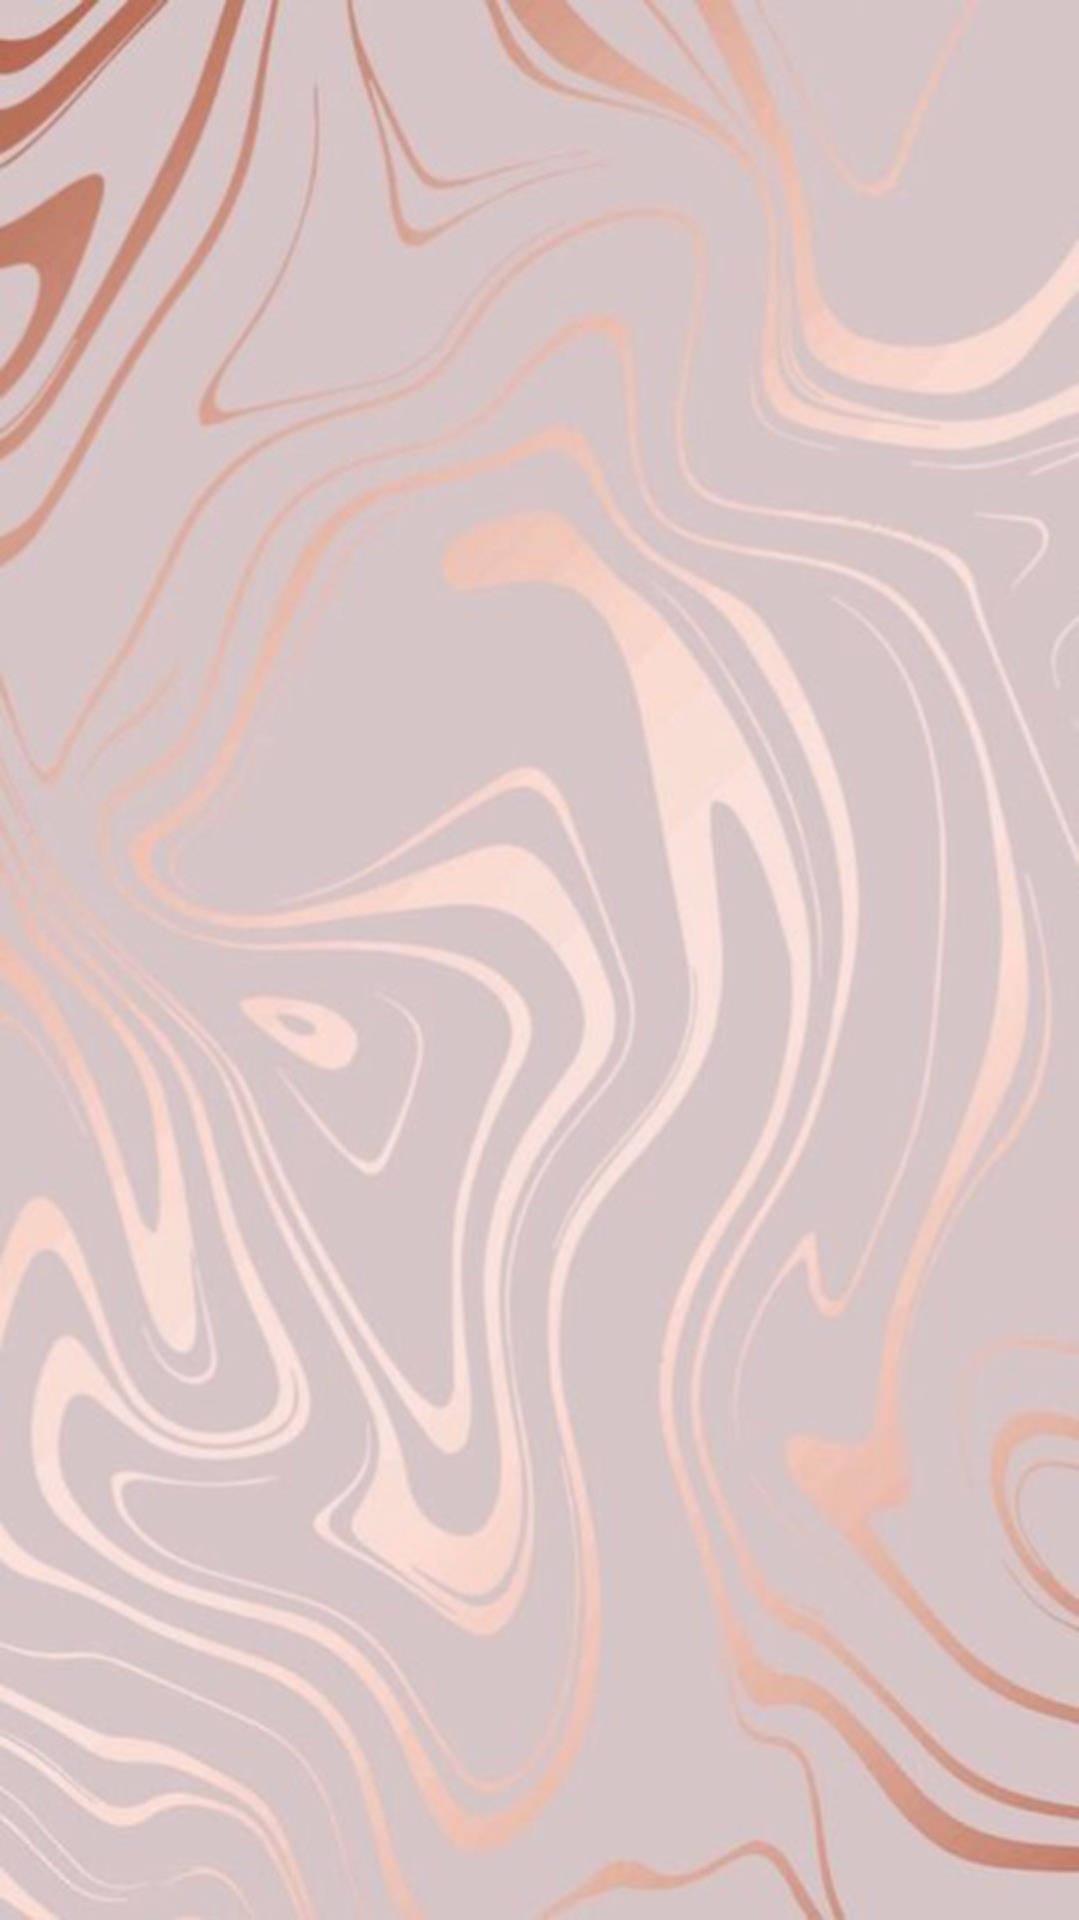 Marbled Rose Gold Iphone Wallpaper